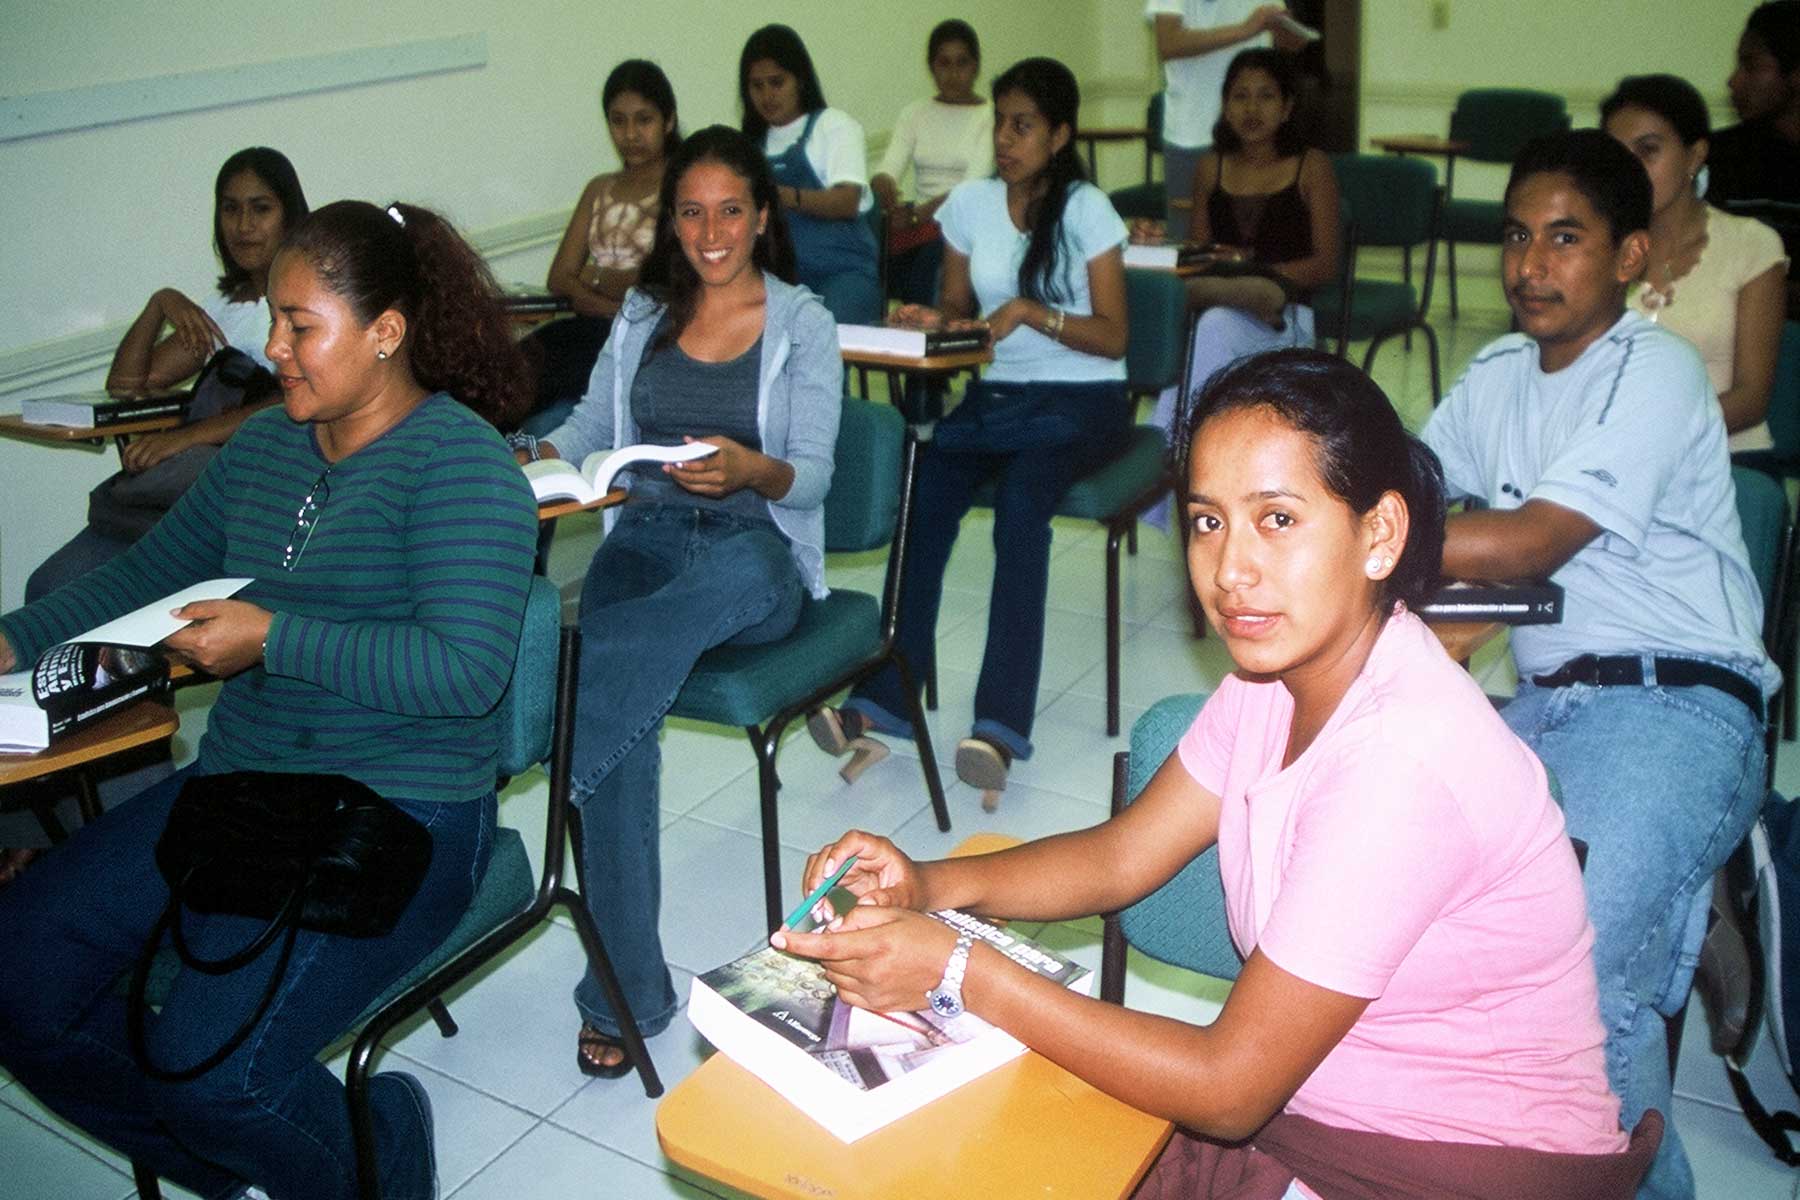 San Cristobal Community College | Galapagos | Dr. Steven A. Martin | Galapagos Photo Journal | Education Online